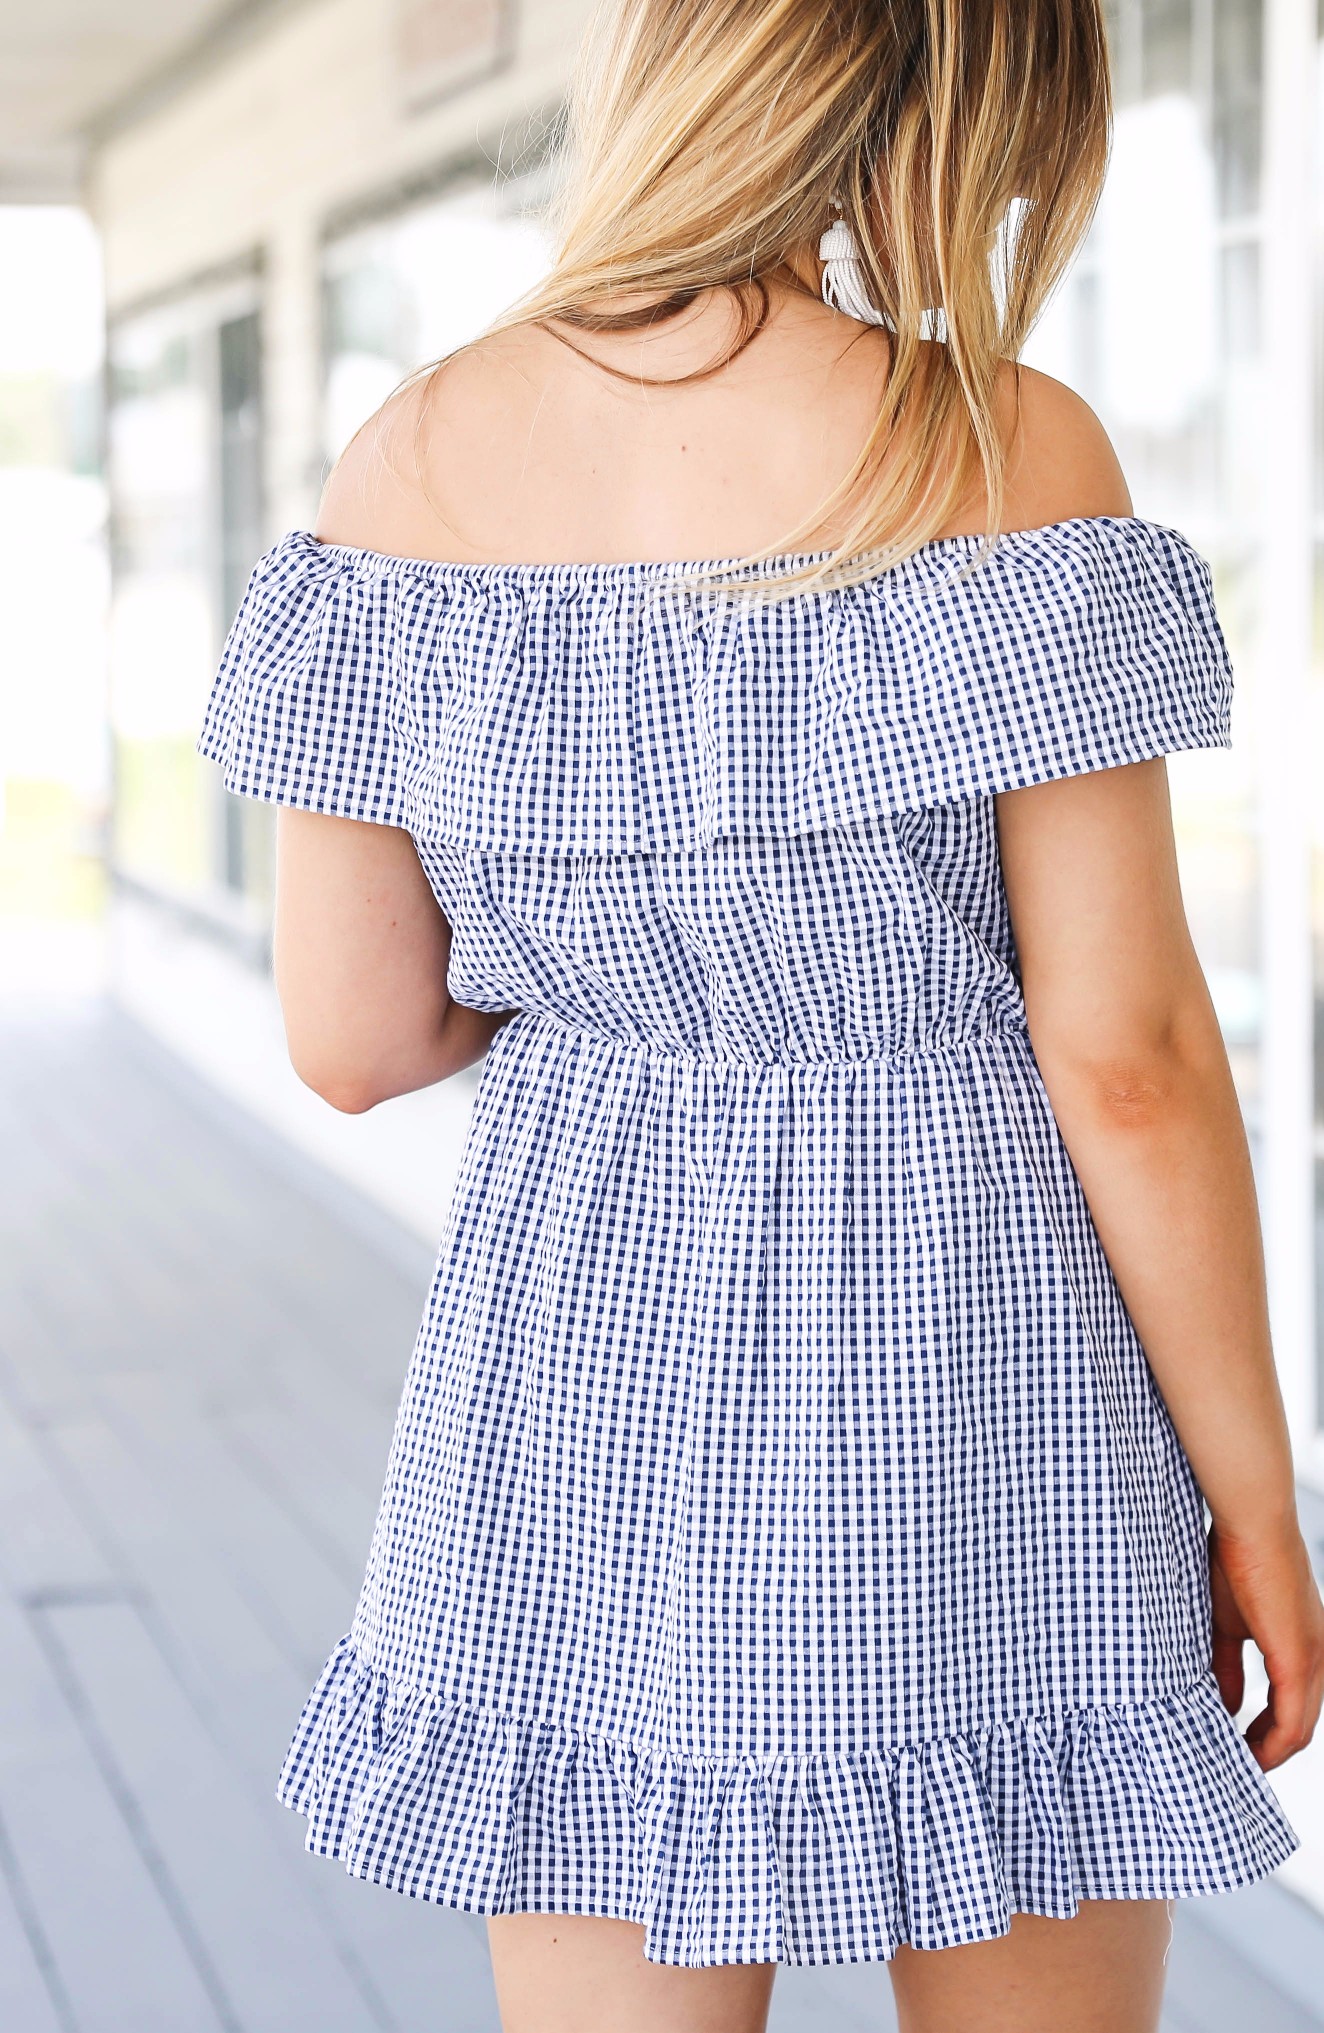 Gingham ruffle dress and round rayb ban sunglasses with tassel earrings on fashion blog daily dose of charm by lauren lindmark